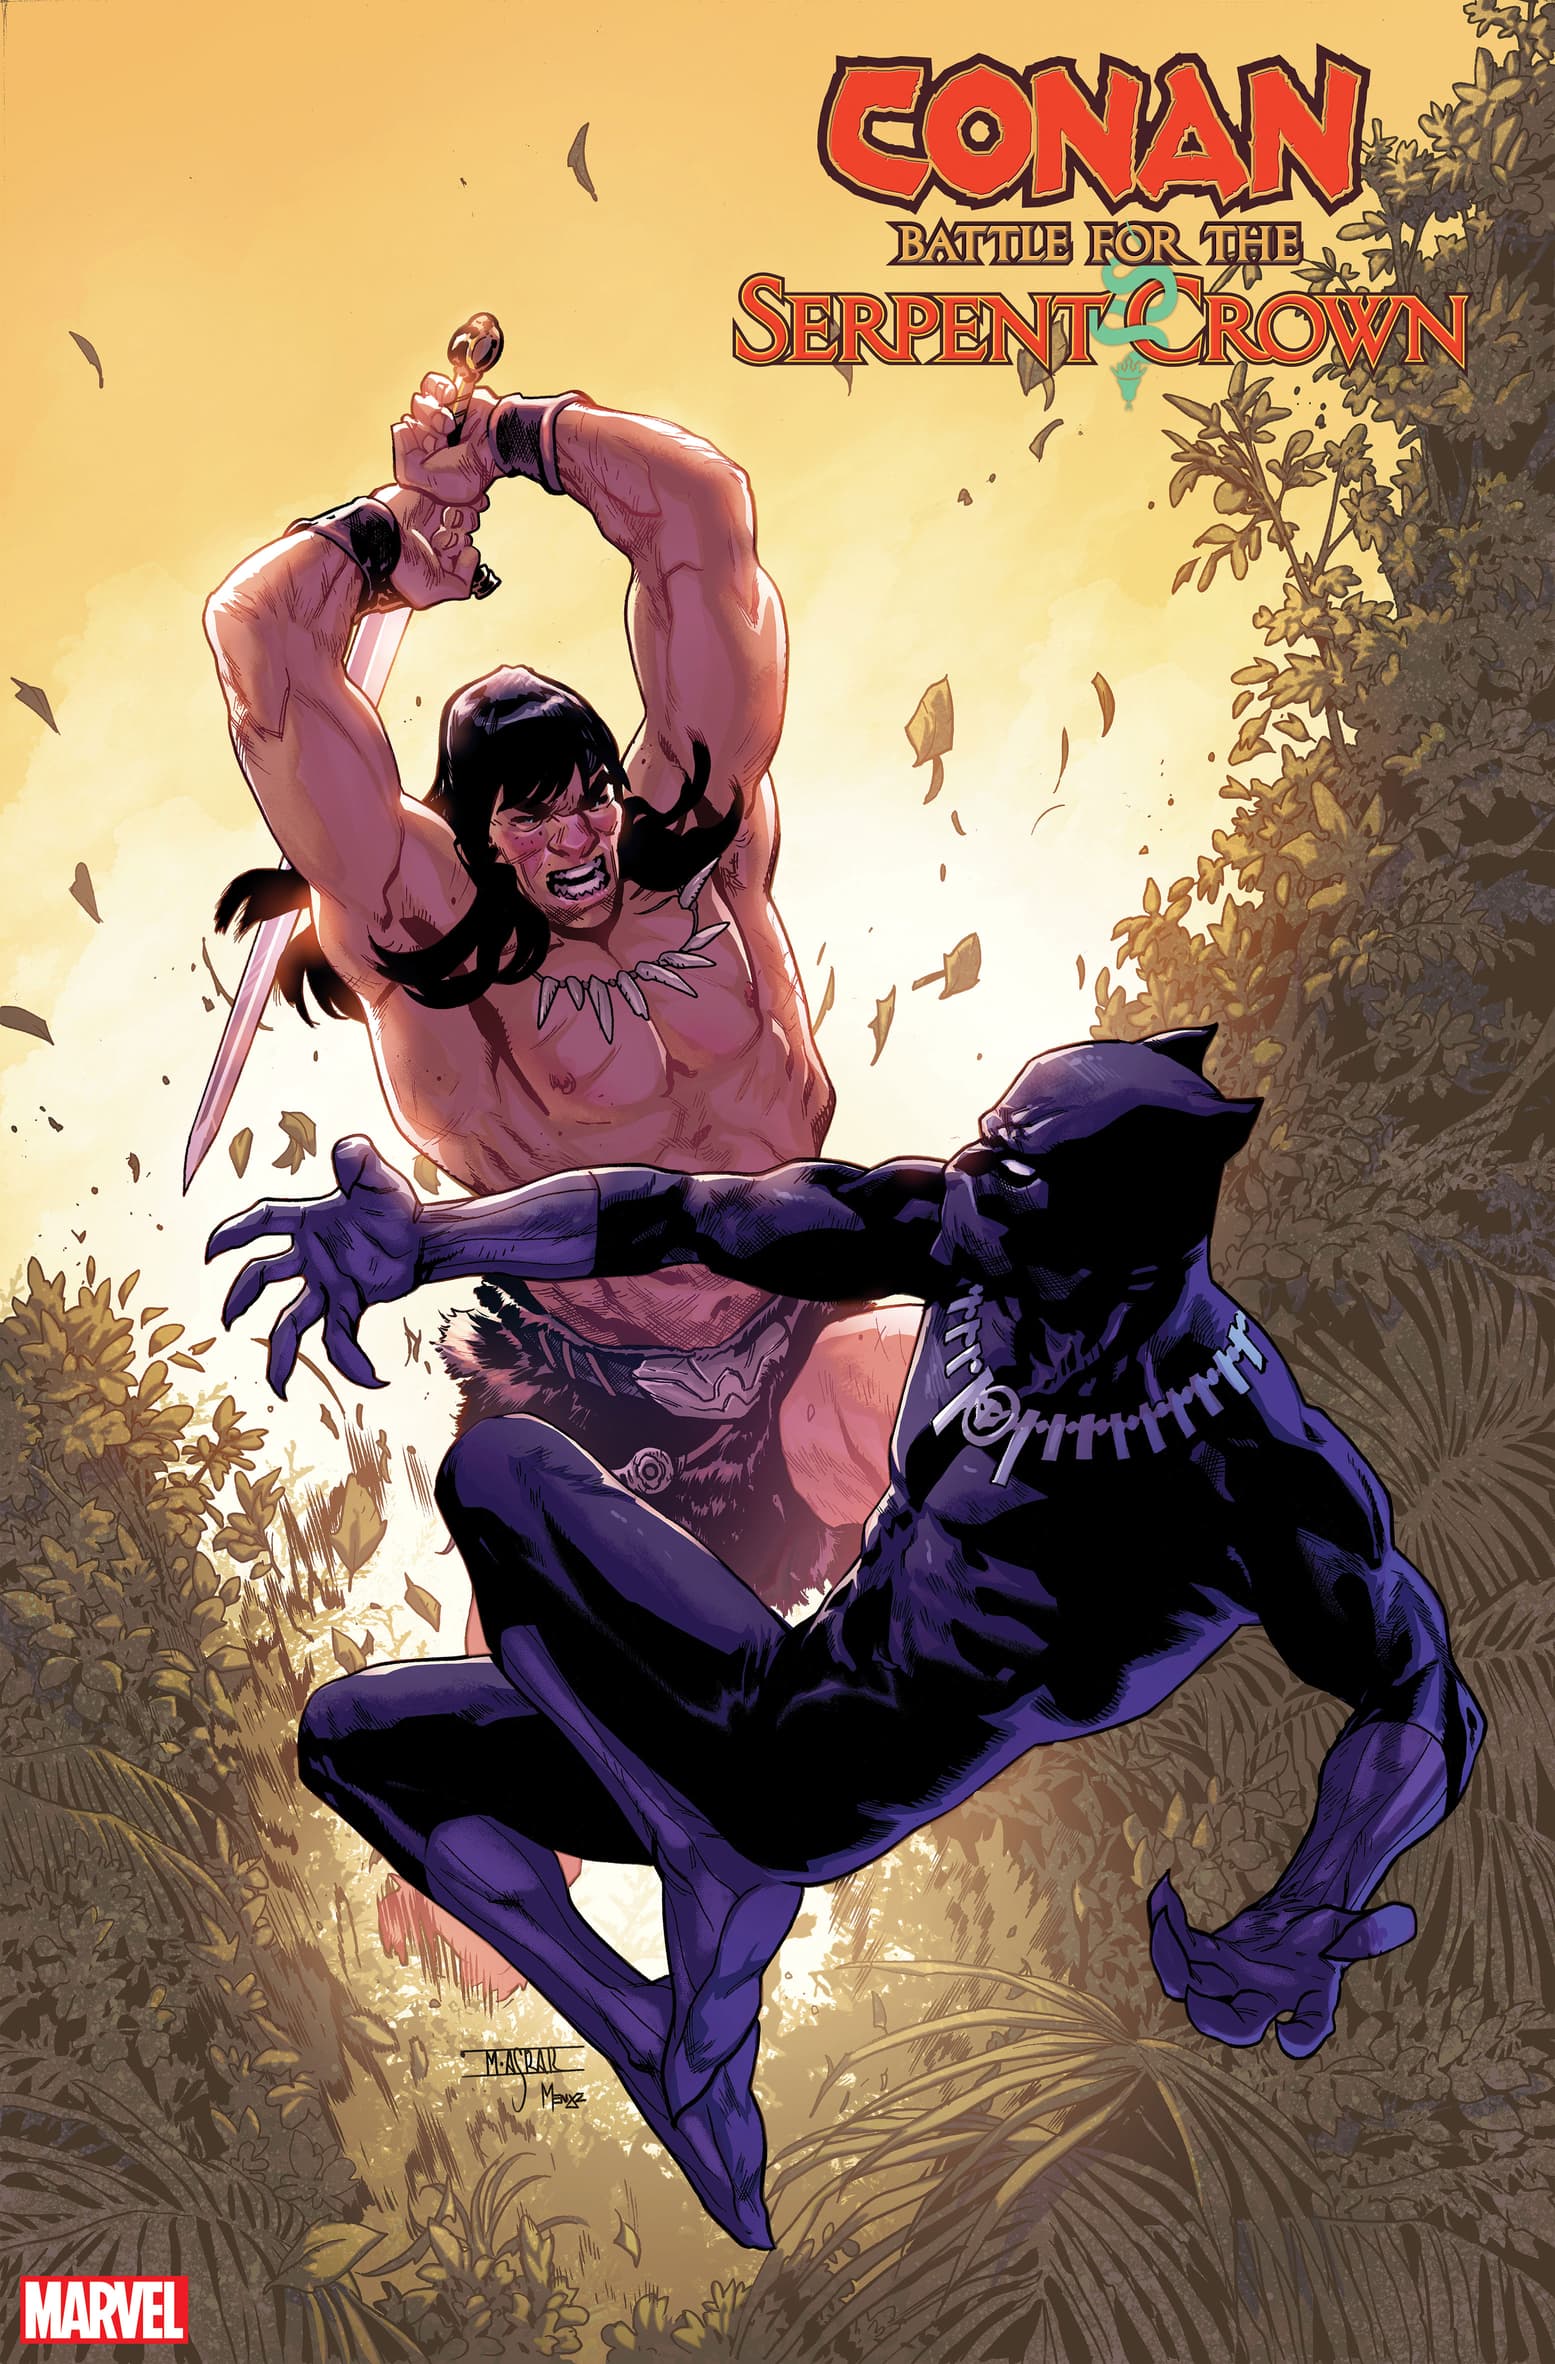 CONAN: BATTLE FOR THE SERPENT CROWN #3 cover